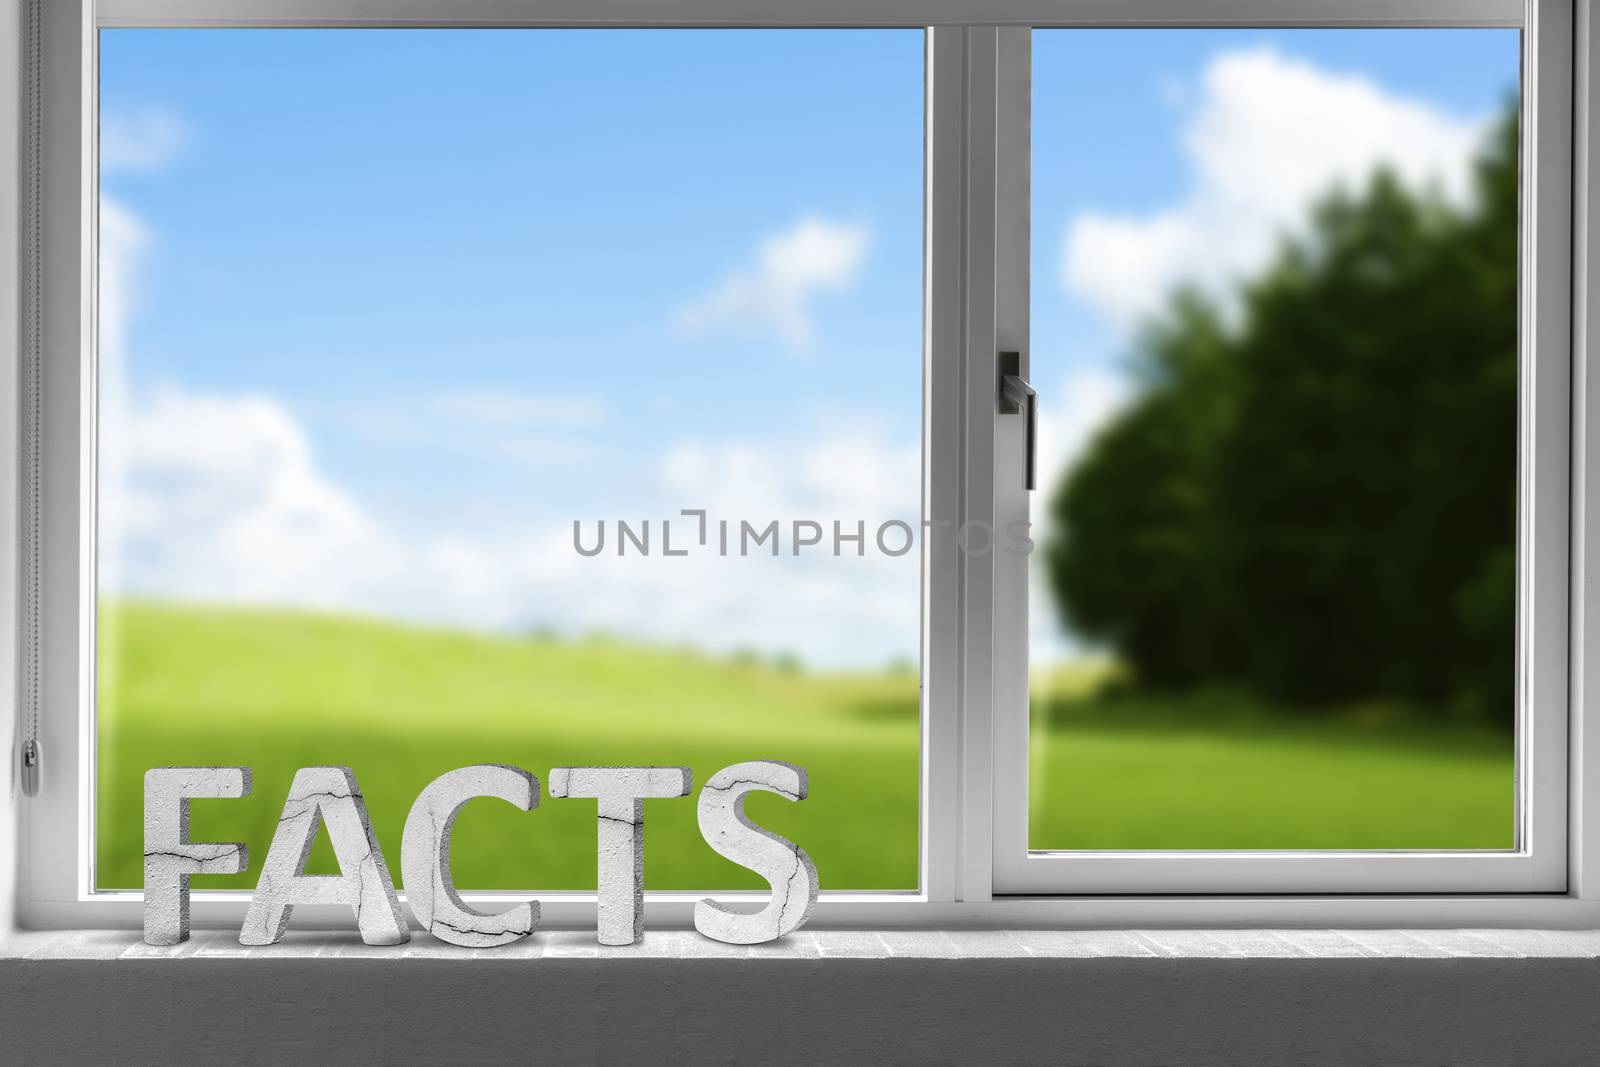 Facts decor sign in a window with a green meadow in the background